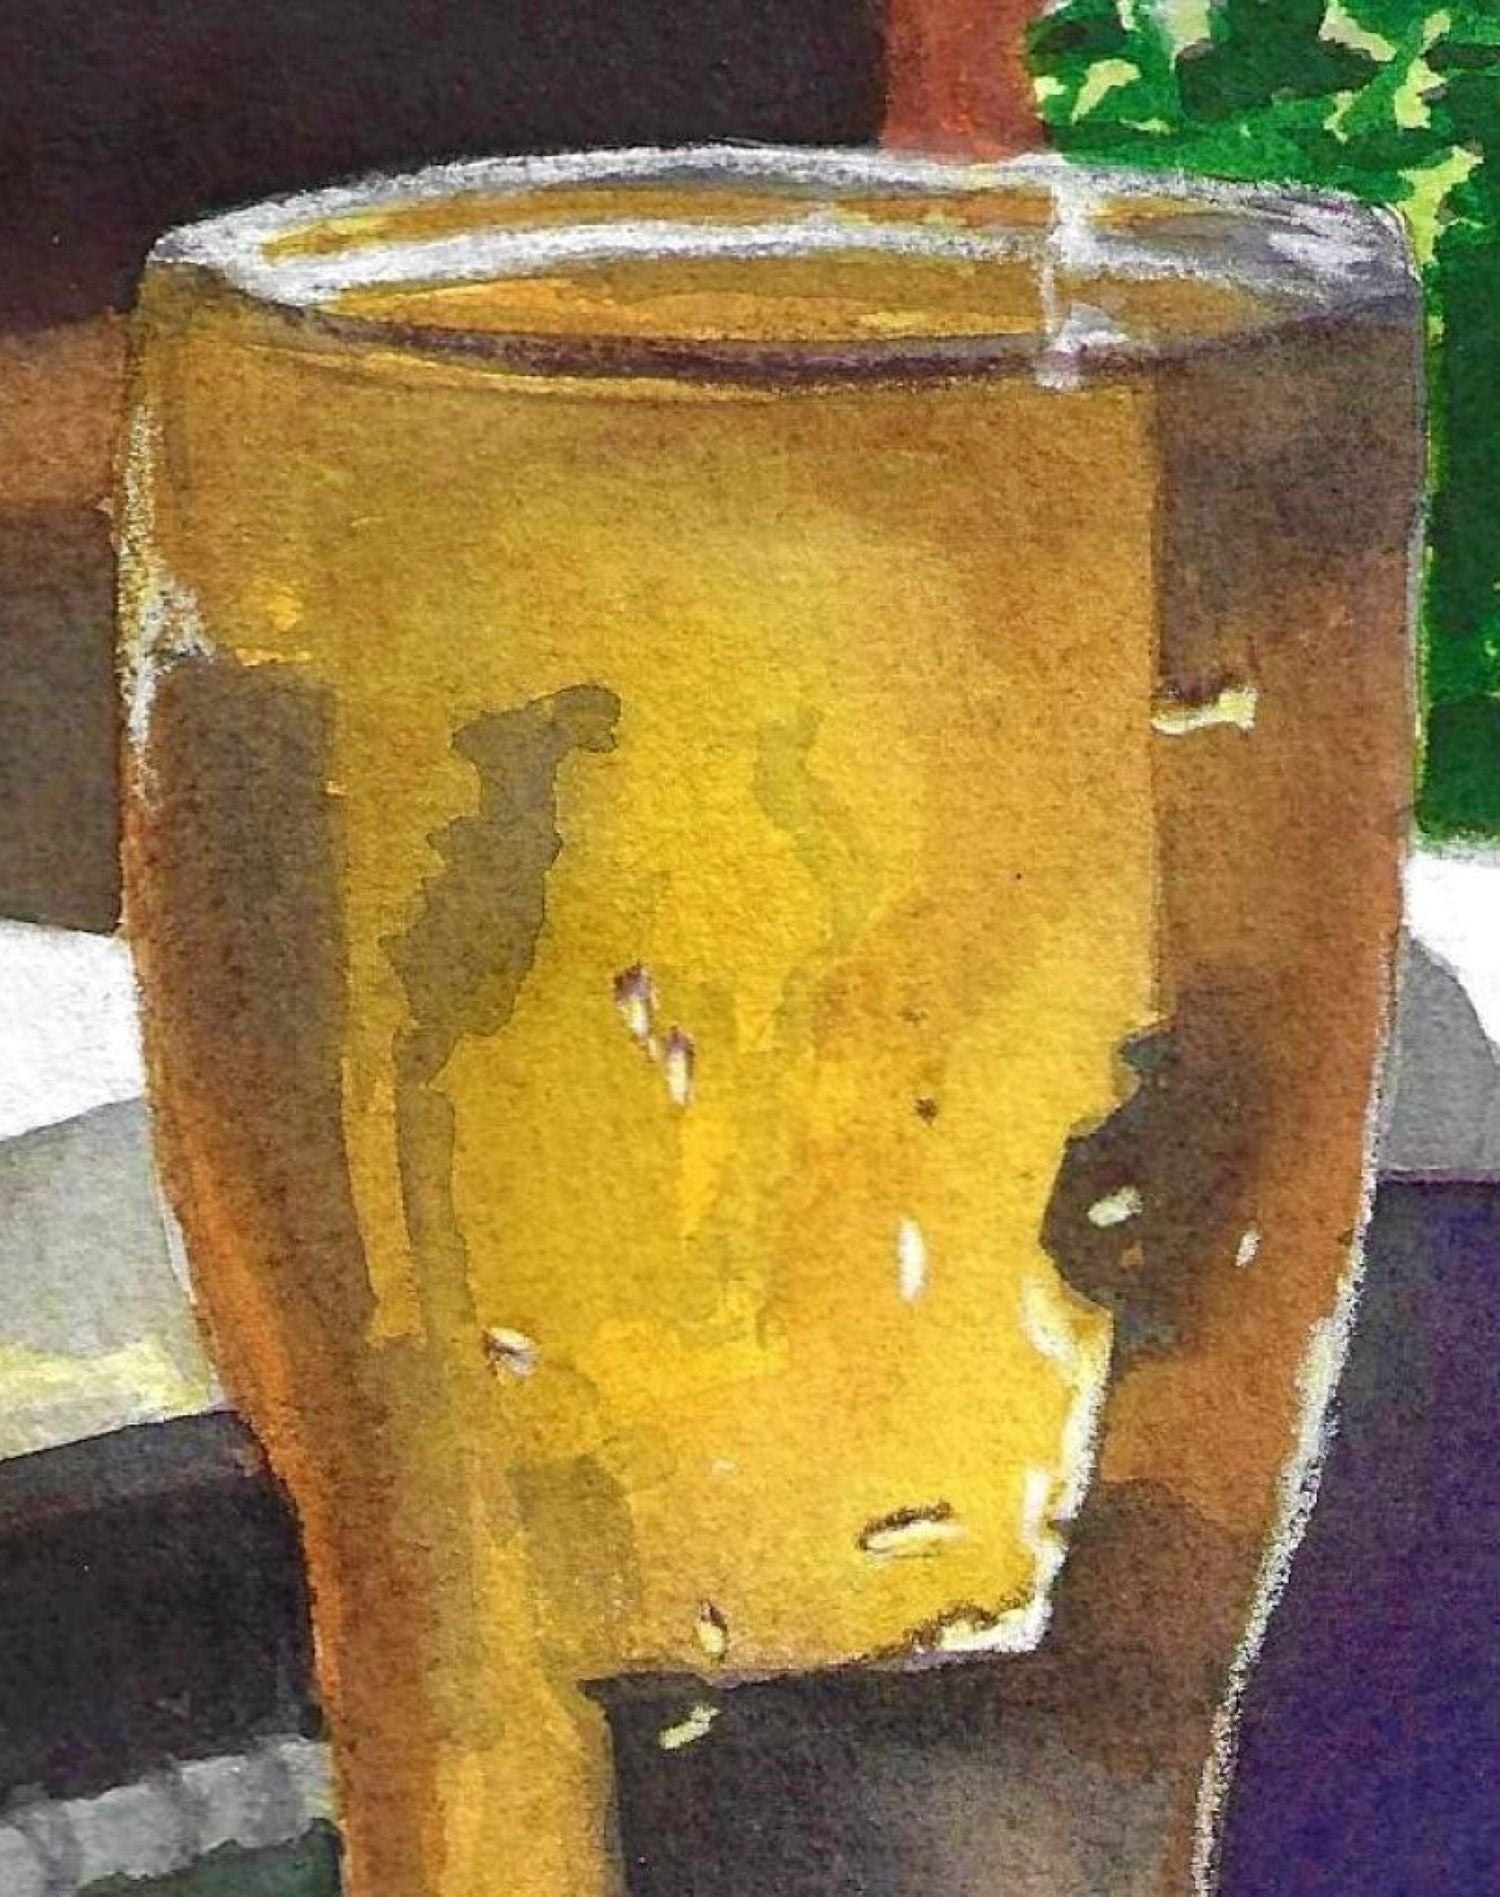 Books & beer painting detail